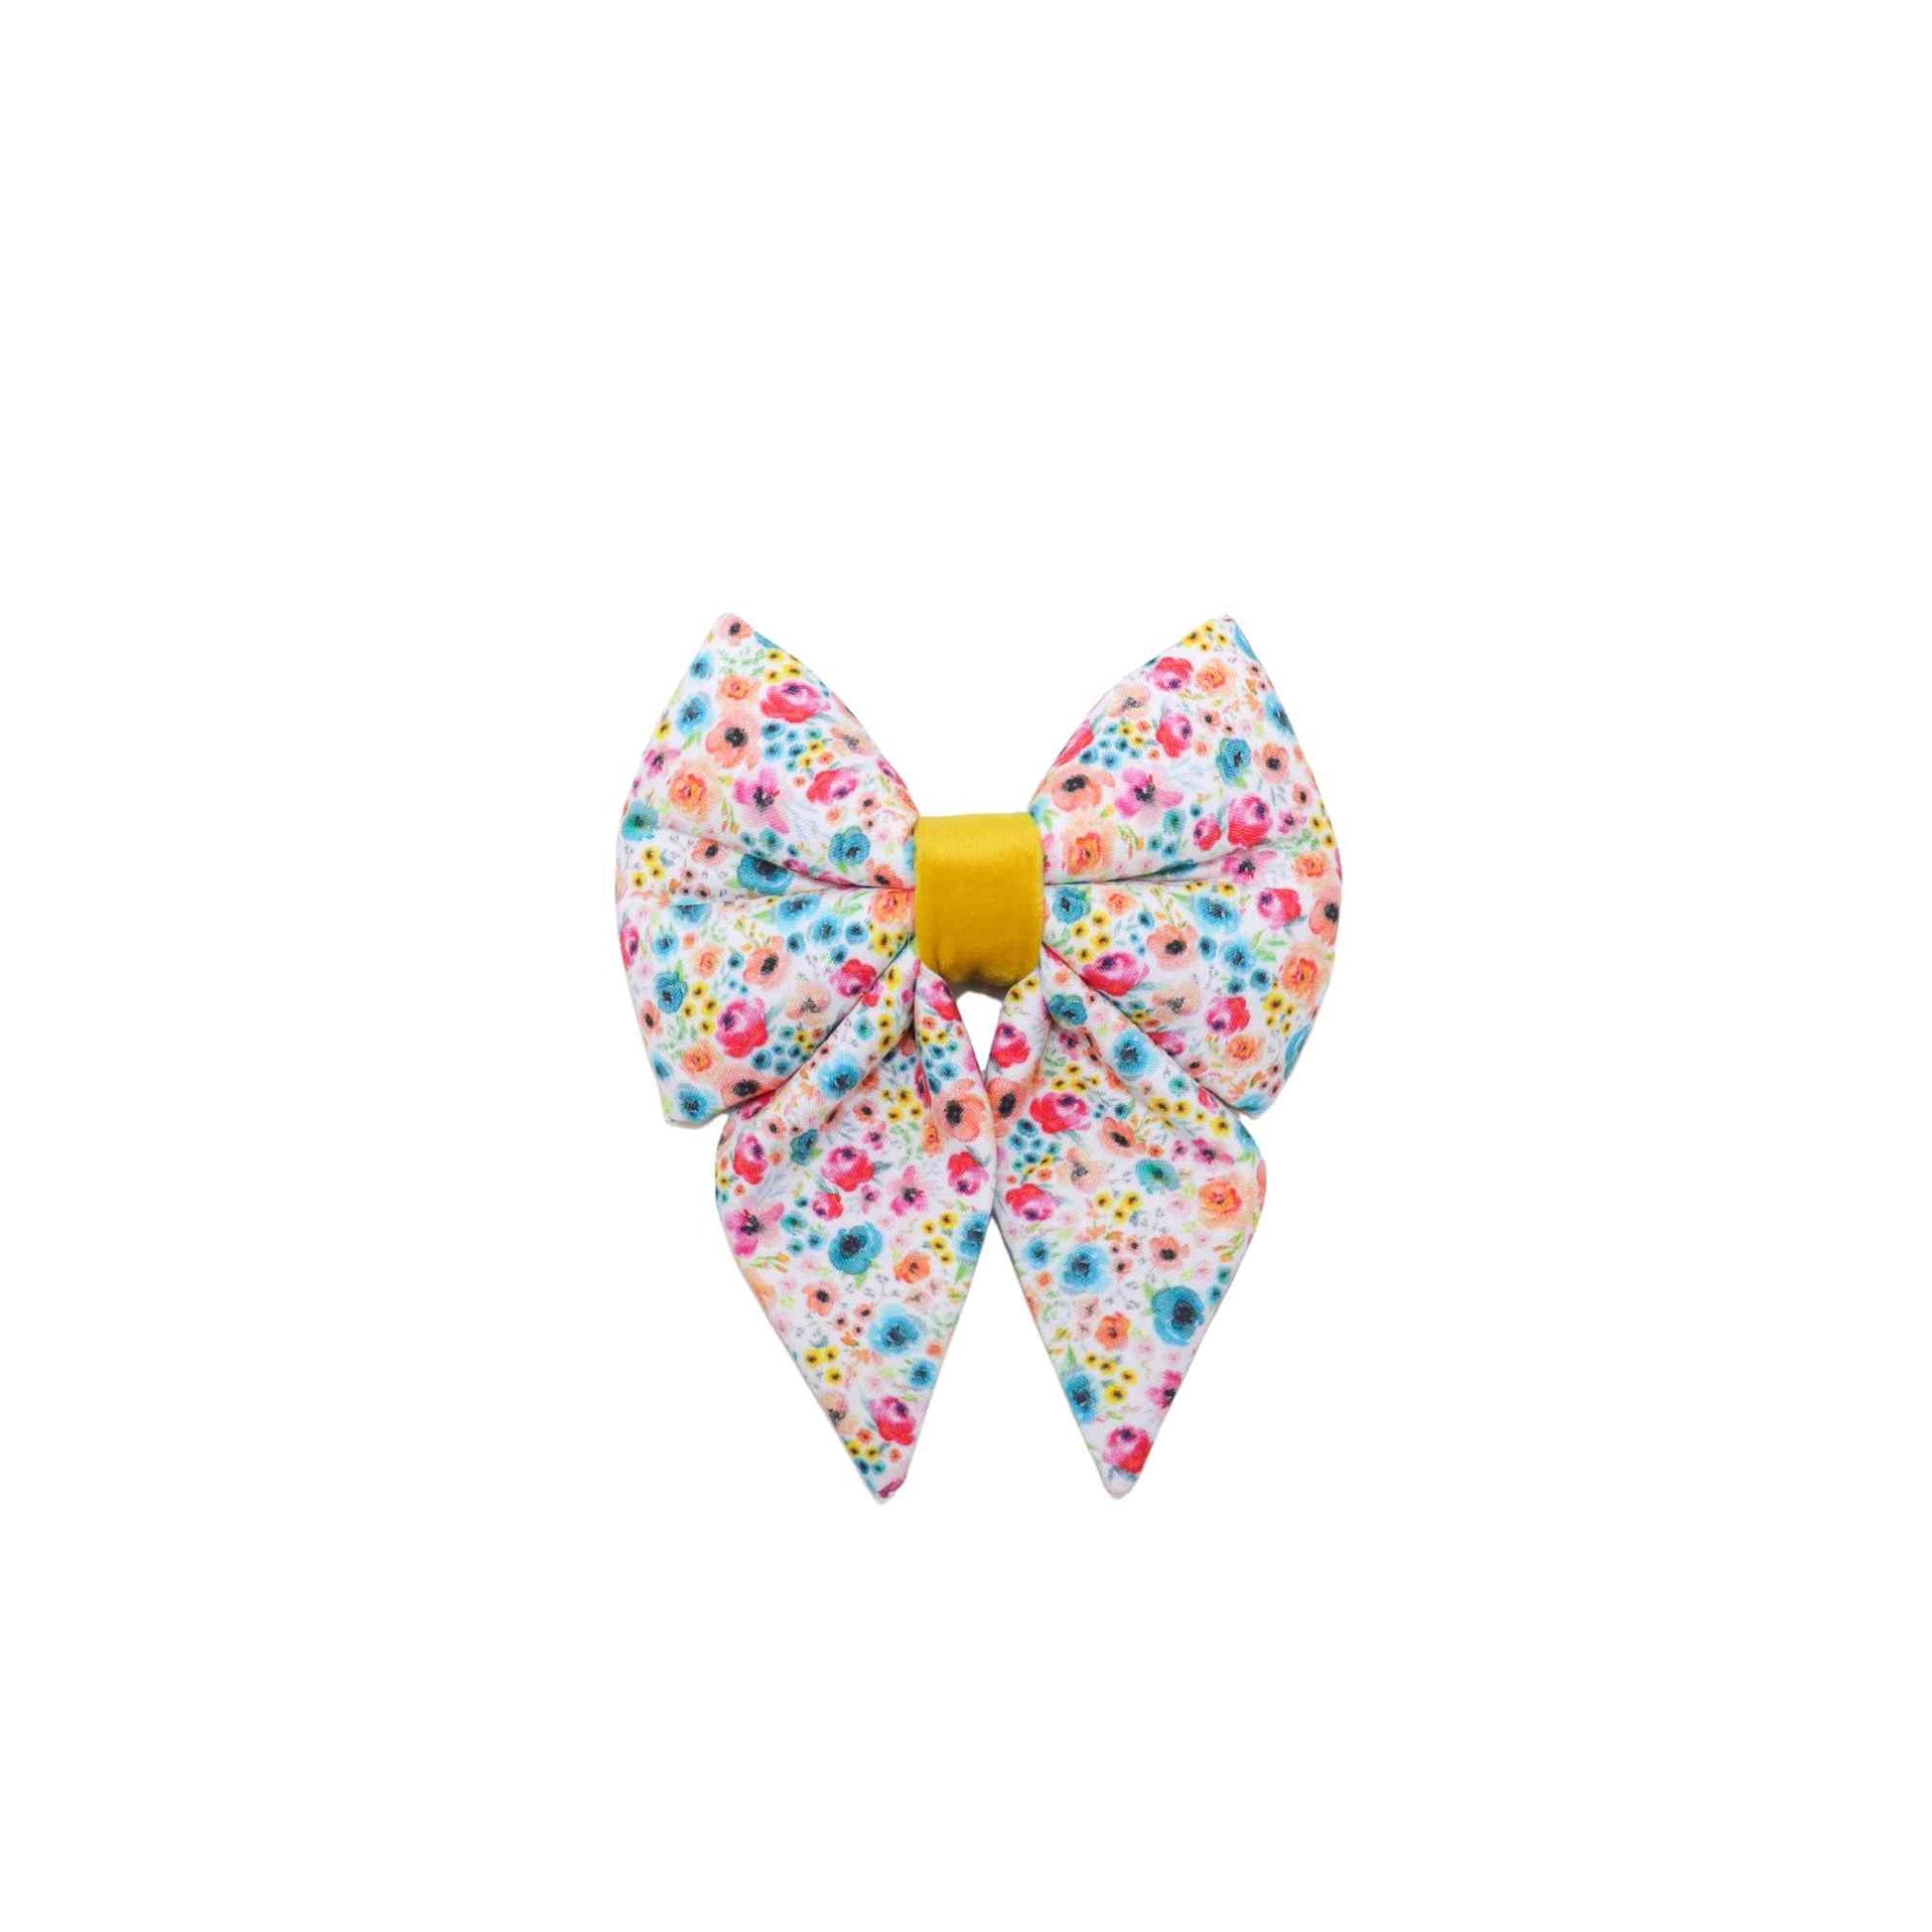 Add a touch of elegance and charm to your furry friend's look with our Pink and Turquoise Floral Girl Dog Sailor Bow! Handmade with high-quality fabric and expert craftsmanship, this bow is designed to slip easily over your pup's collar and comes in a range of sizes to fit all breeds. The beautiful pink and turquoise floral print is perfect for adding a pop of color to any outfit. 